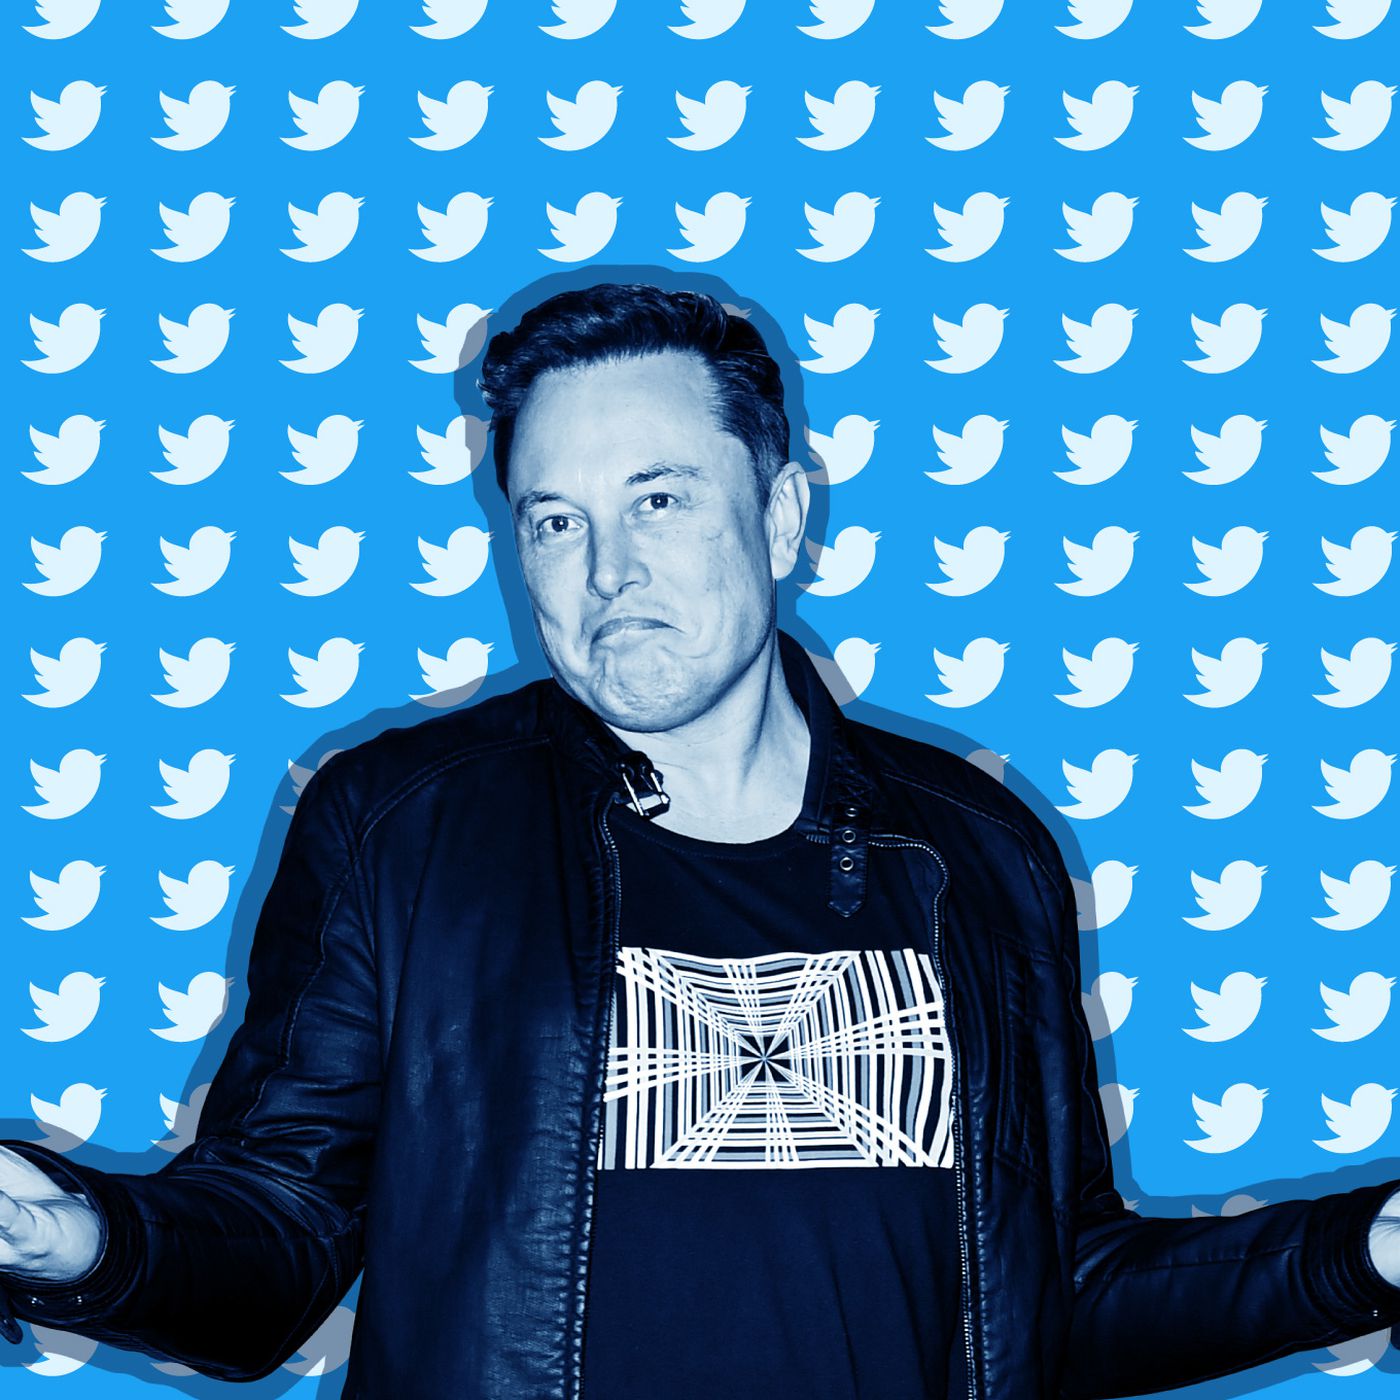 Twitter, Inc. (NYSE: TWTR) Legal Dispute of Takeover Attempt with Elon Musk Moved to New Direction